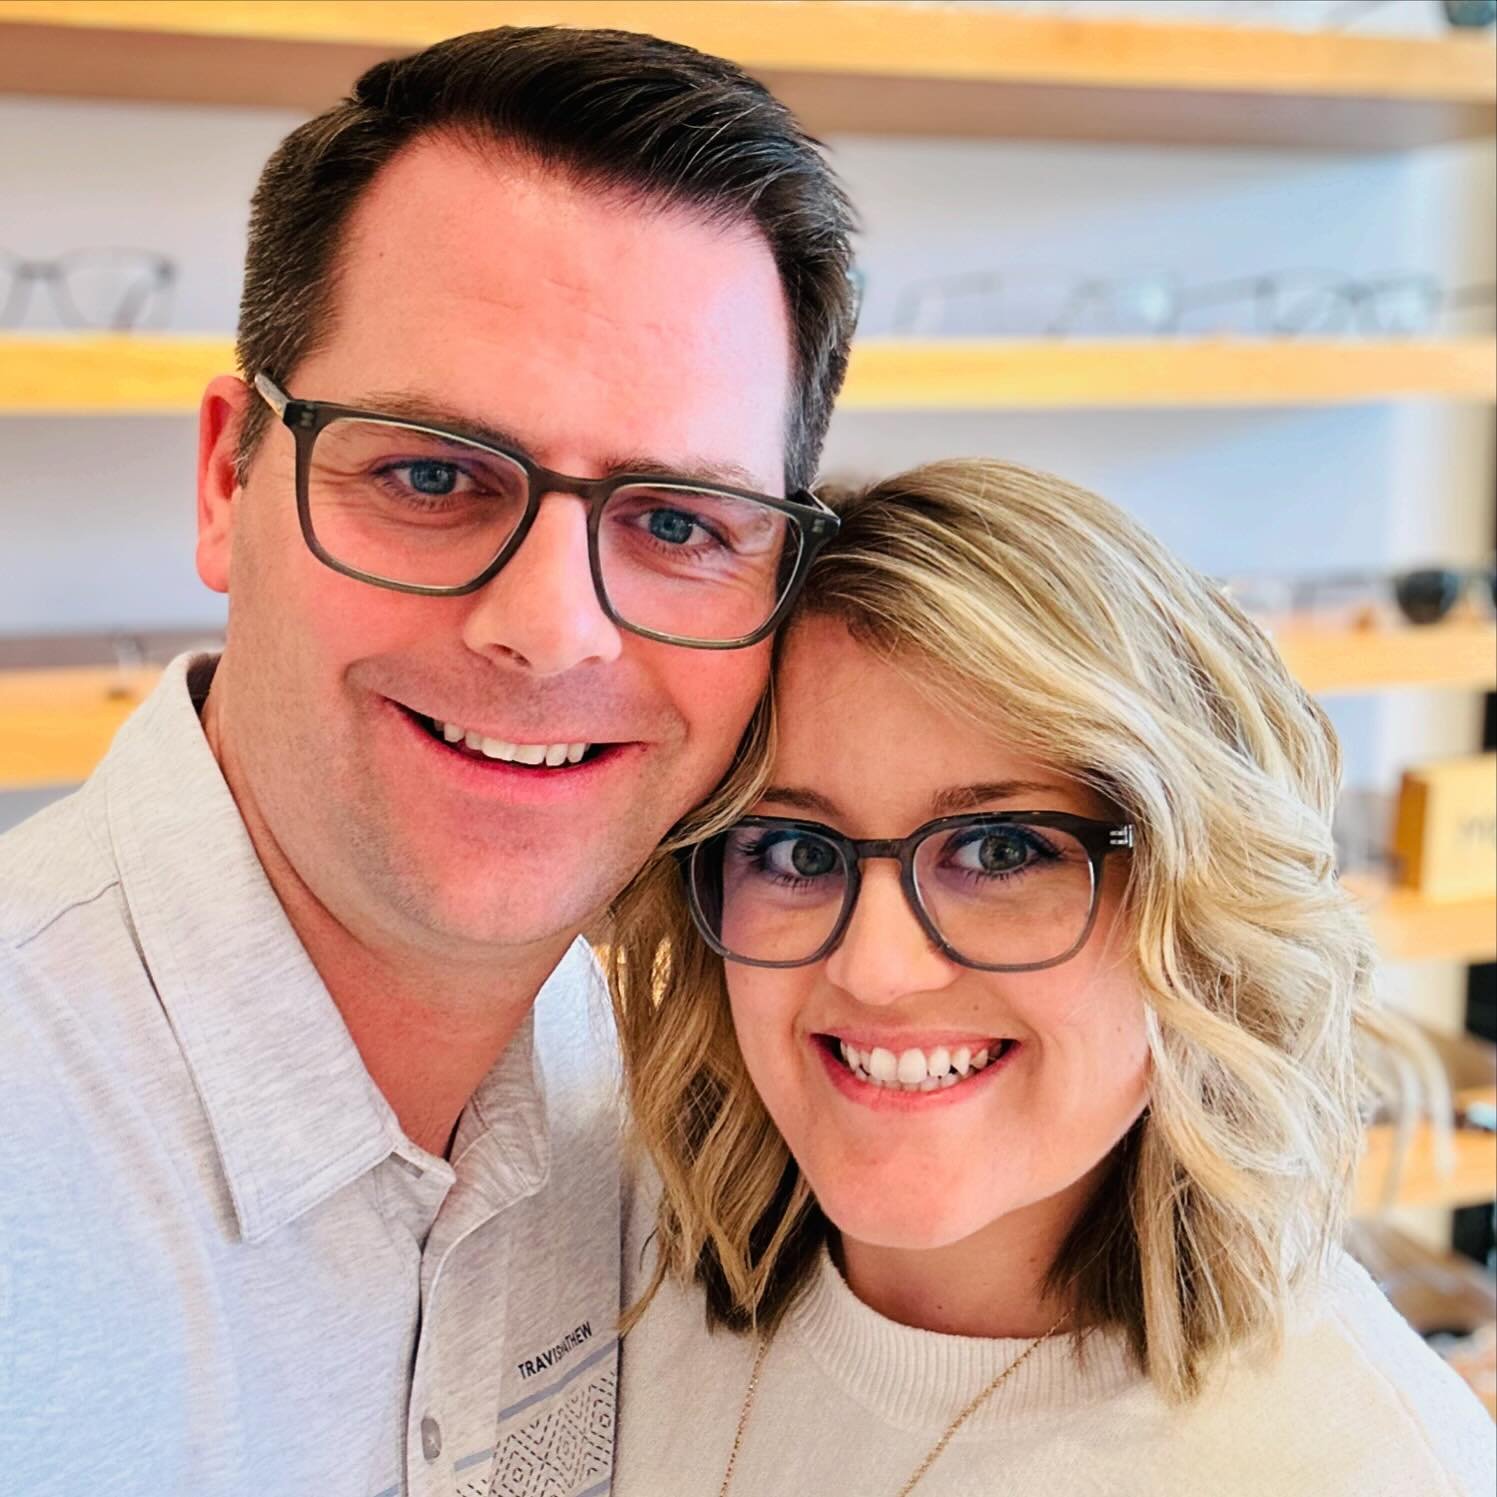 Happy Saturday!! 🤓🙌🏻☀️ Our dream team is here with some surprising openings 🤯 So if you needed a last minute appt, be sure to call us to claim one before they get booked up!! #eyes #eyeexam #saturdayvibes #dreamteam #eyeglasses #glasses #sunglass